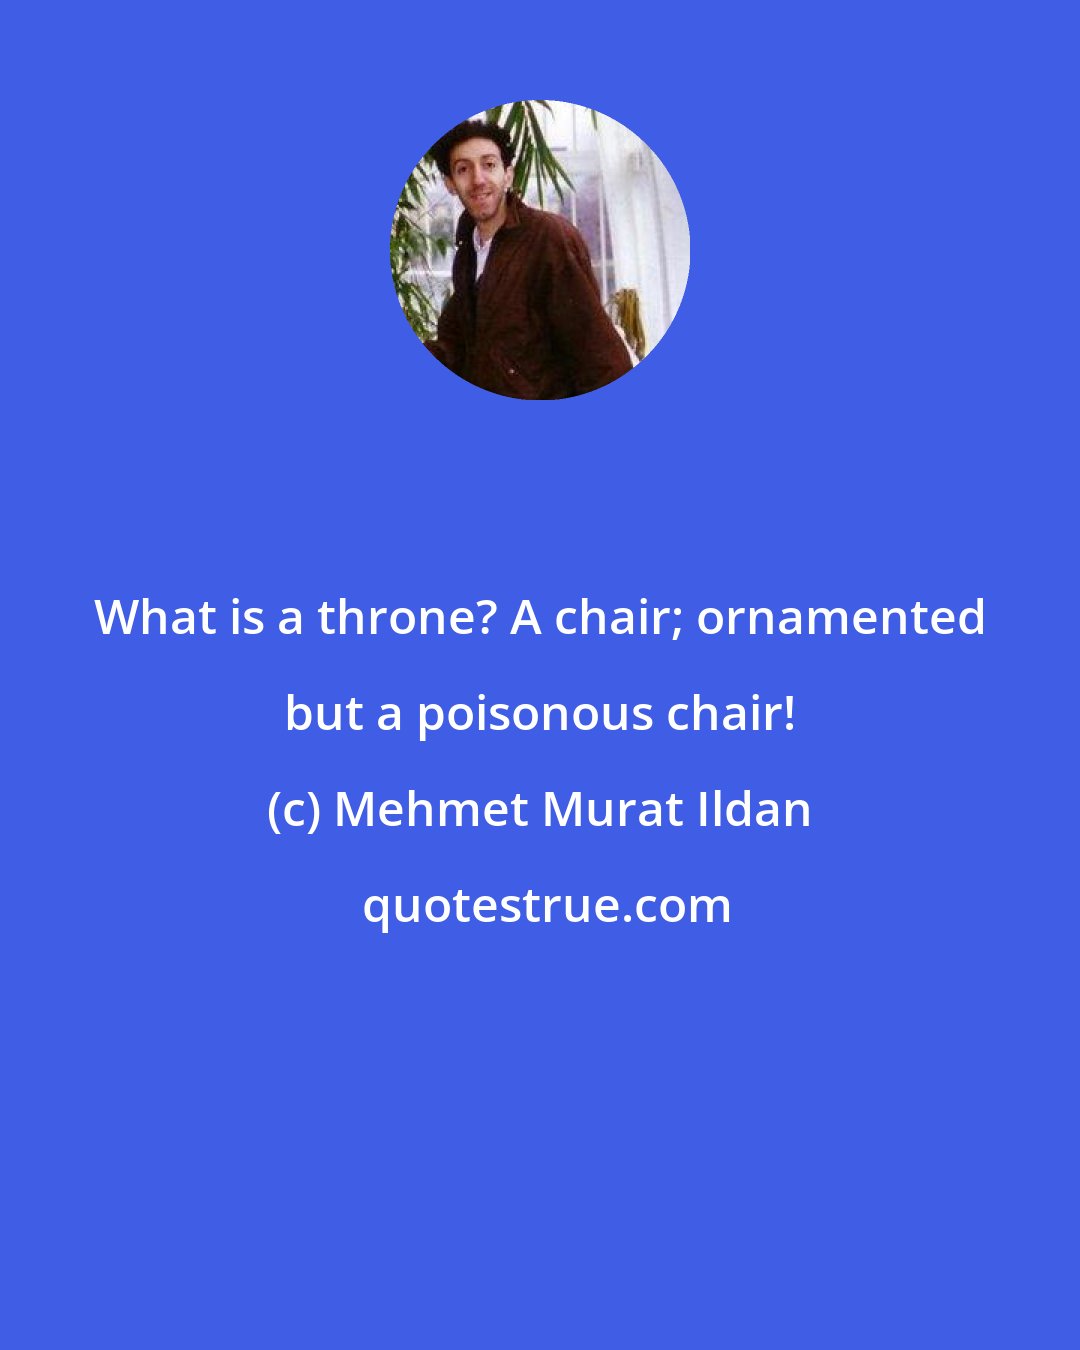 Mehmet Murat Ildan: What is a throne? A chair; ornamented but a poisonous chair!